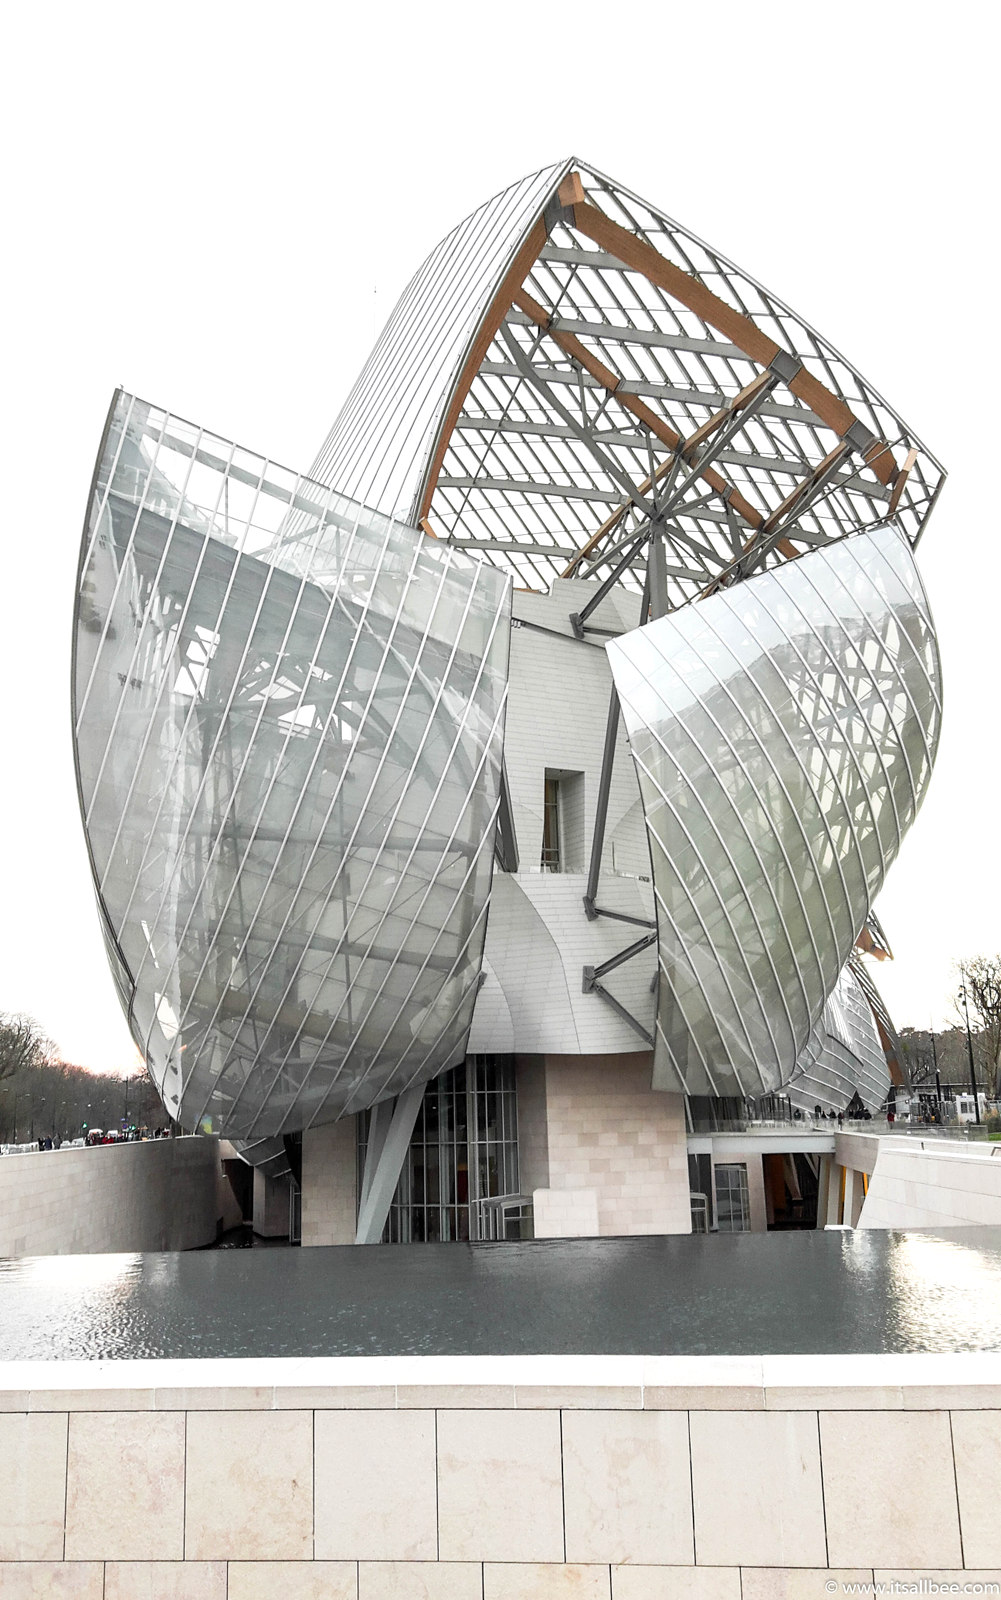 Another] Trip to Fondation Louis Vuitton – View from the Back